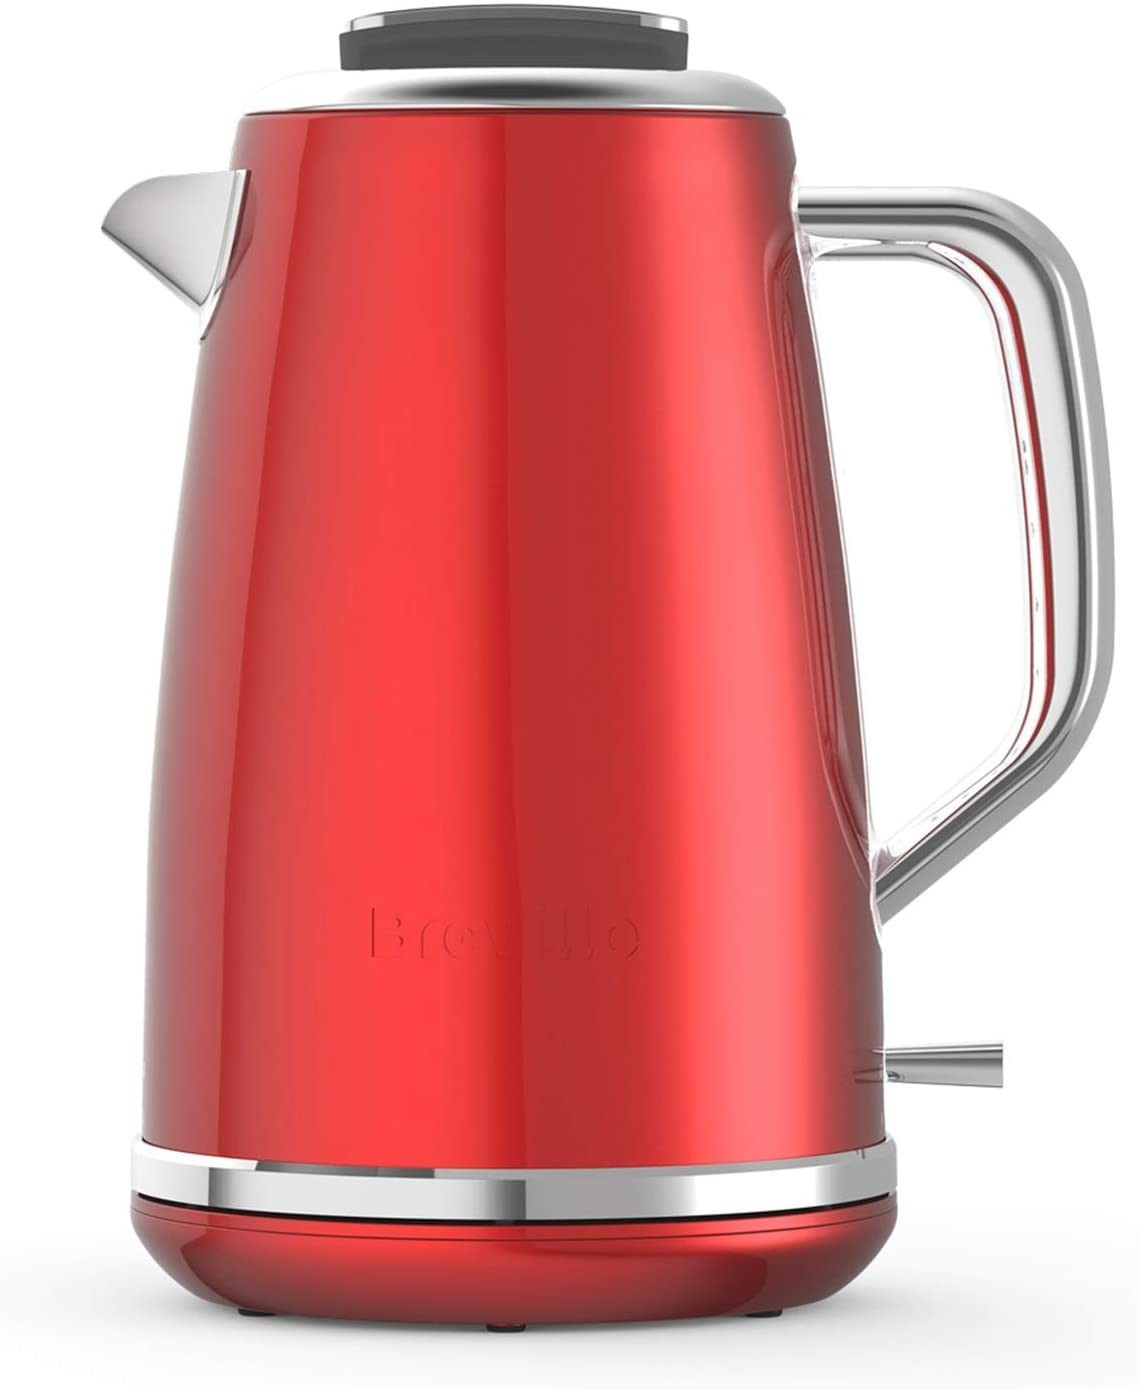 Photos - Electric Kettle Breville Lustra Kettle 